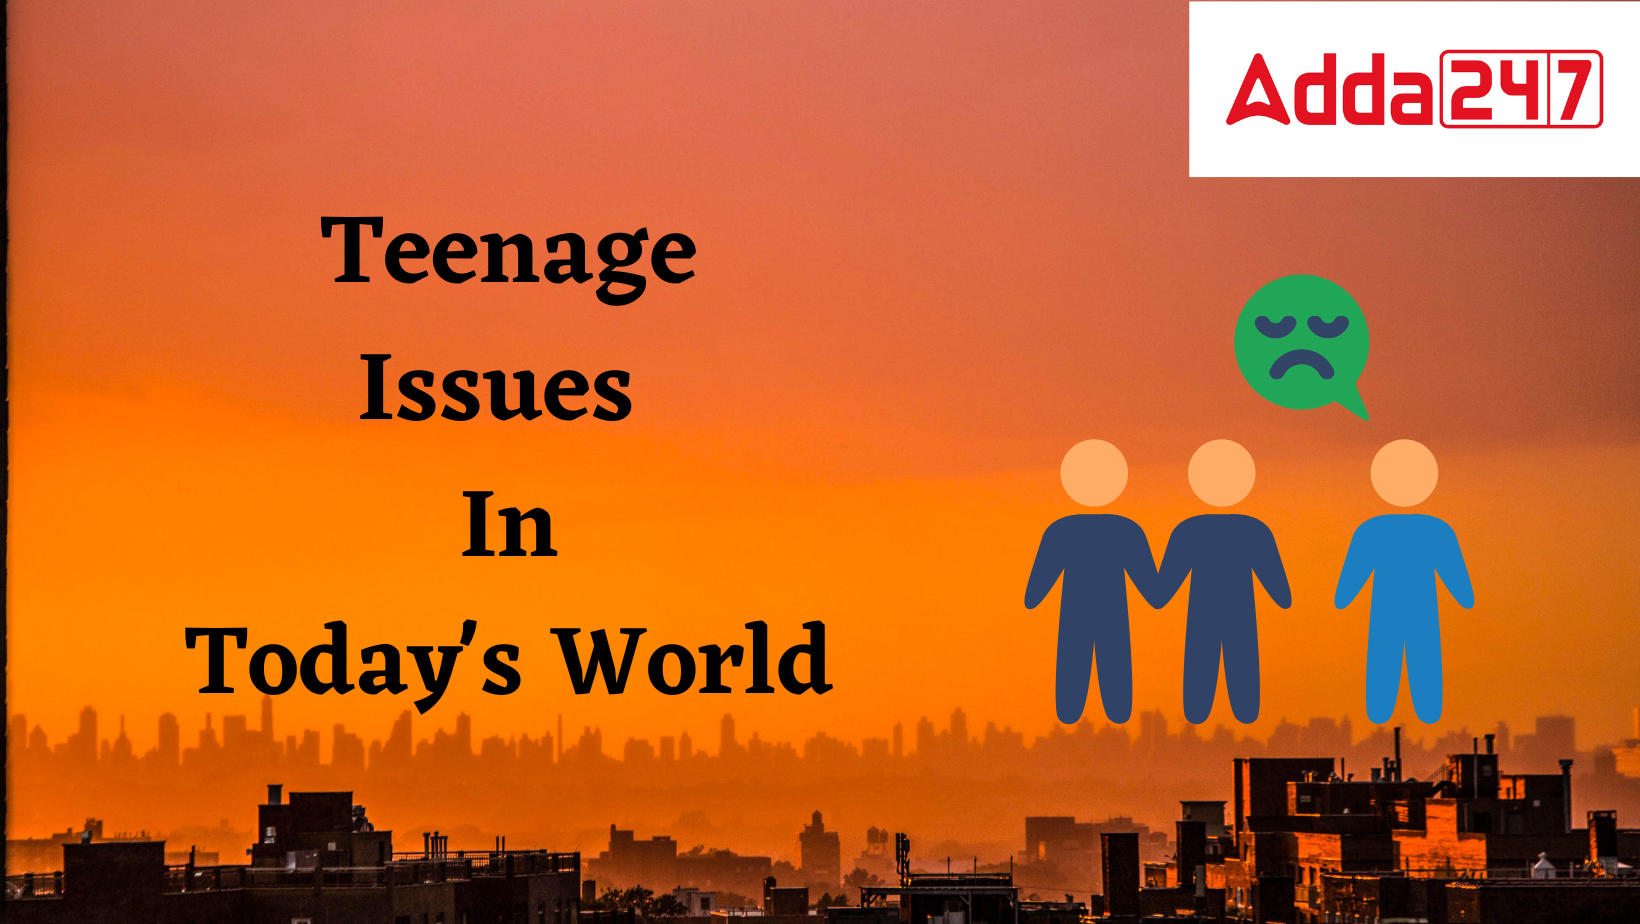 Teenage issues in today's world